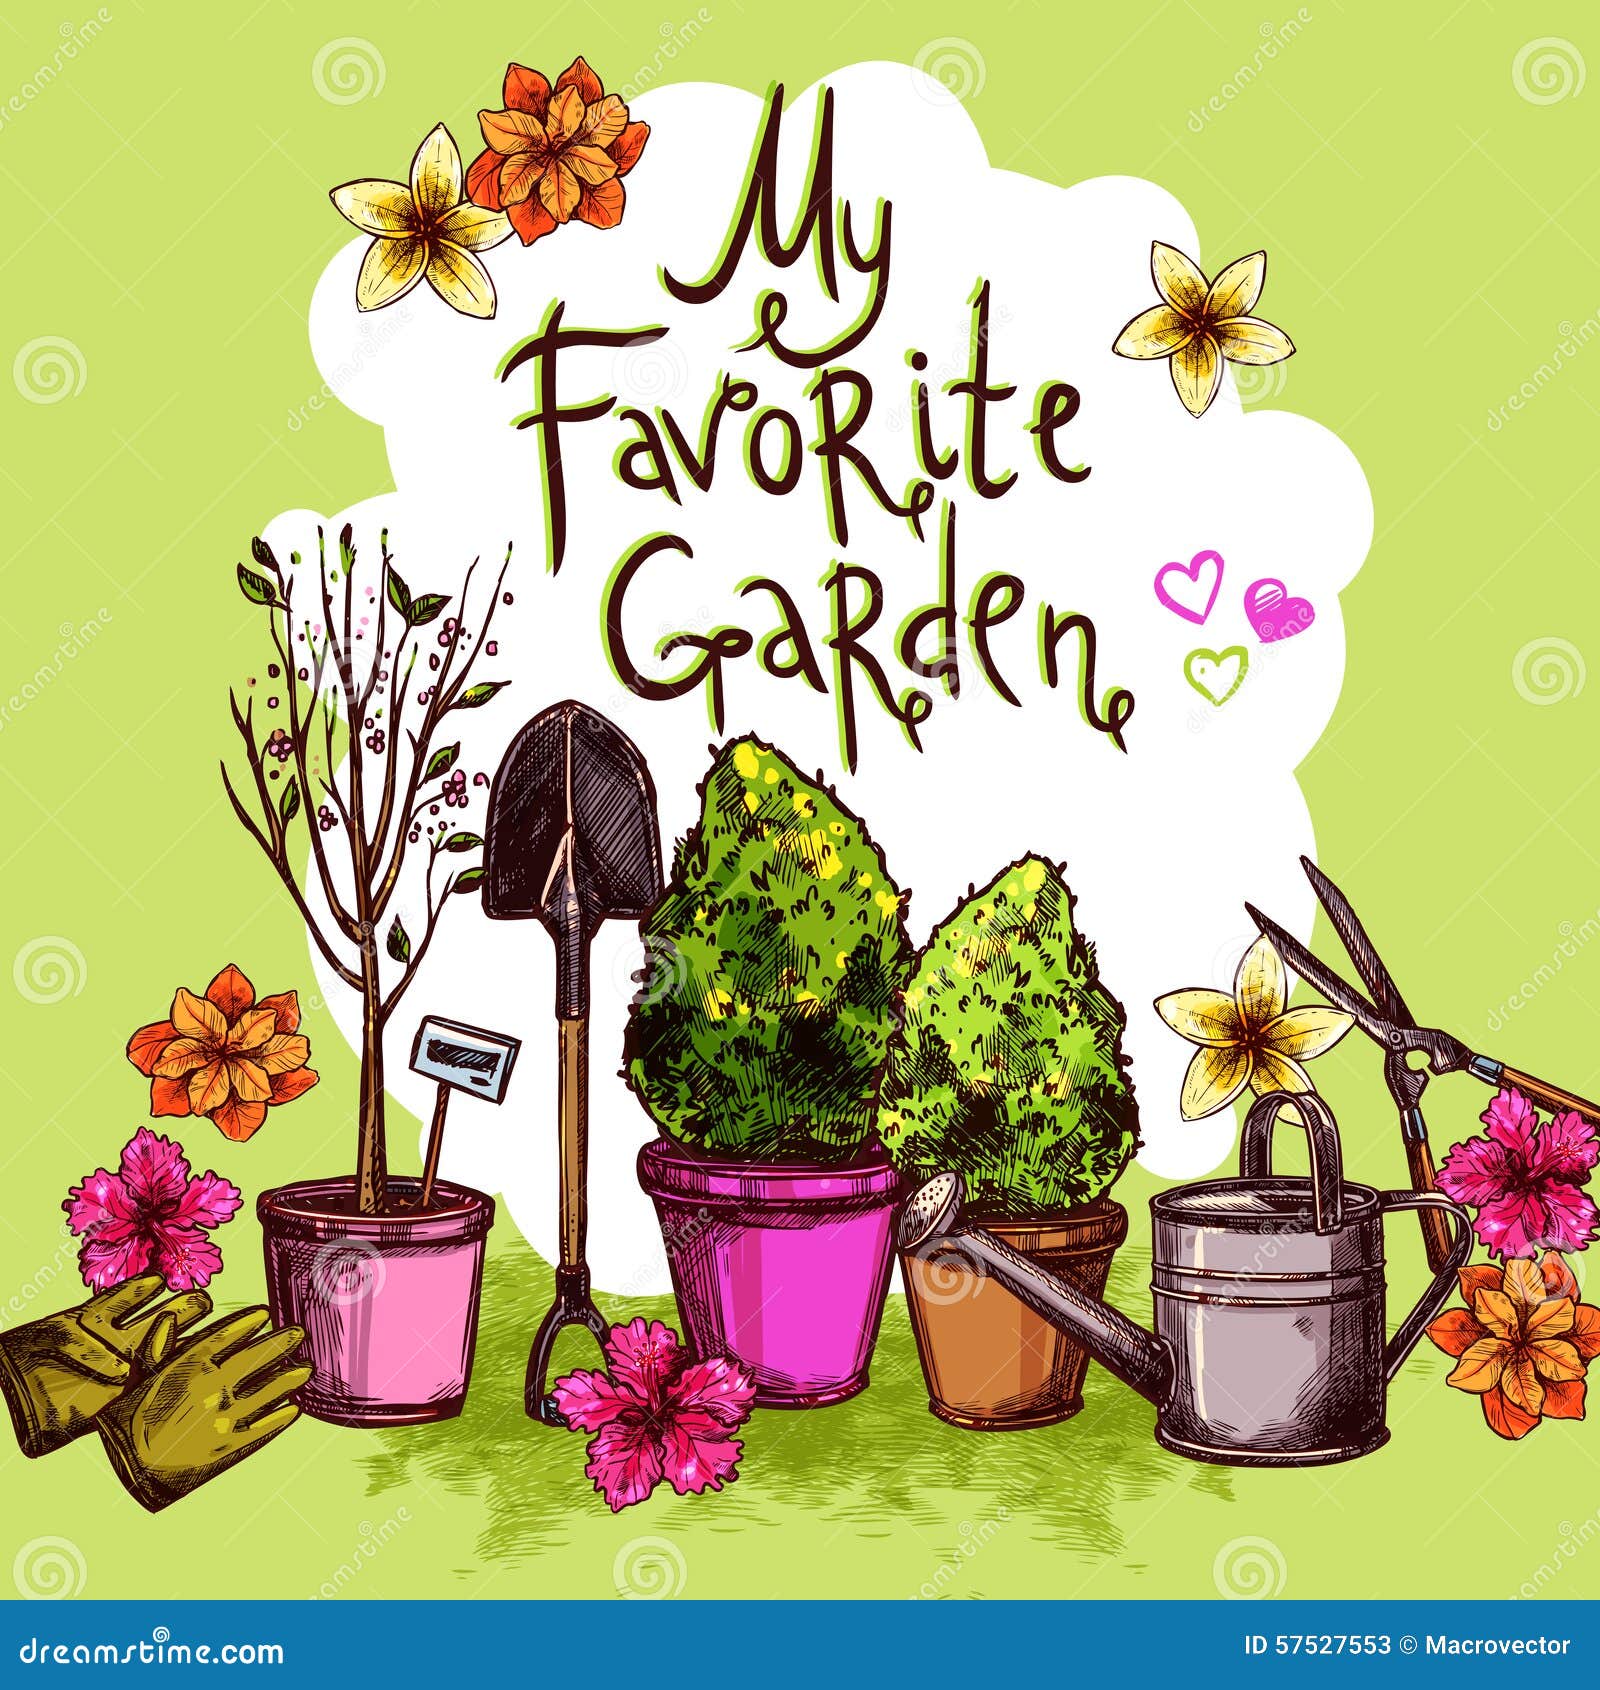 Easy and simple Flower Garden drawing - YouTube